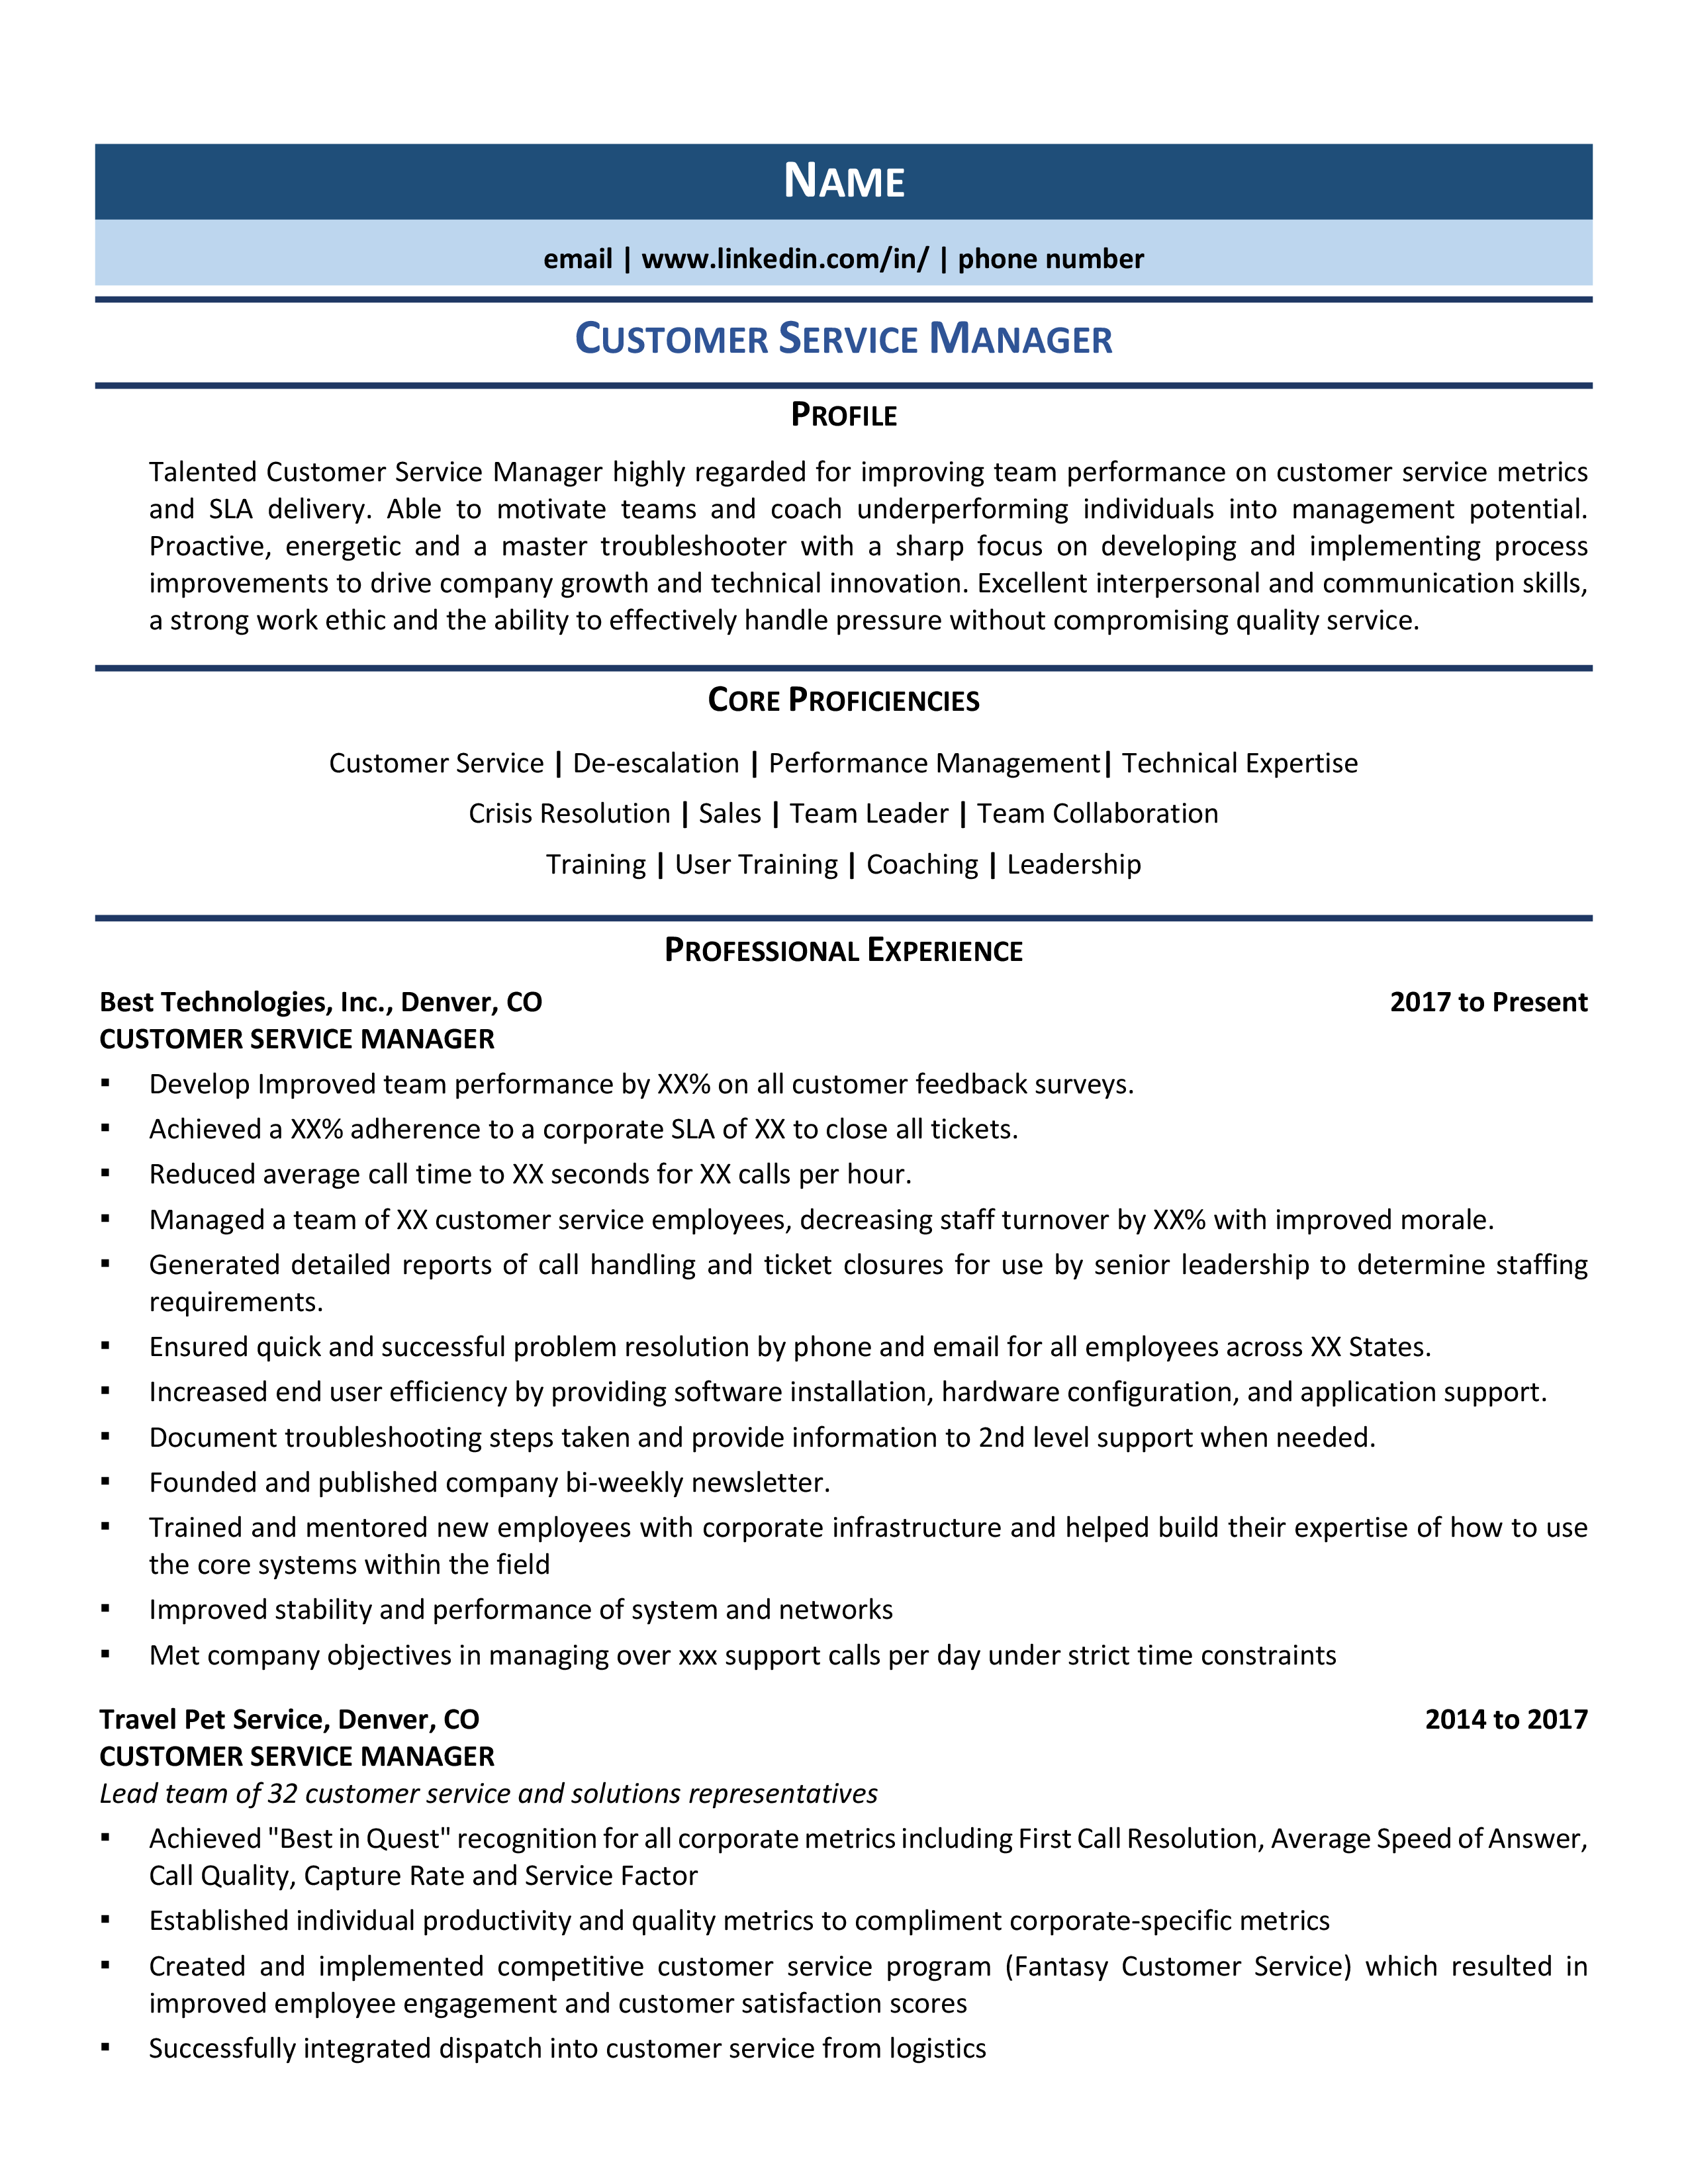 resume format for customer service manager